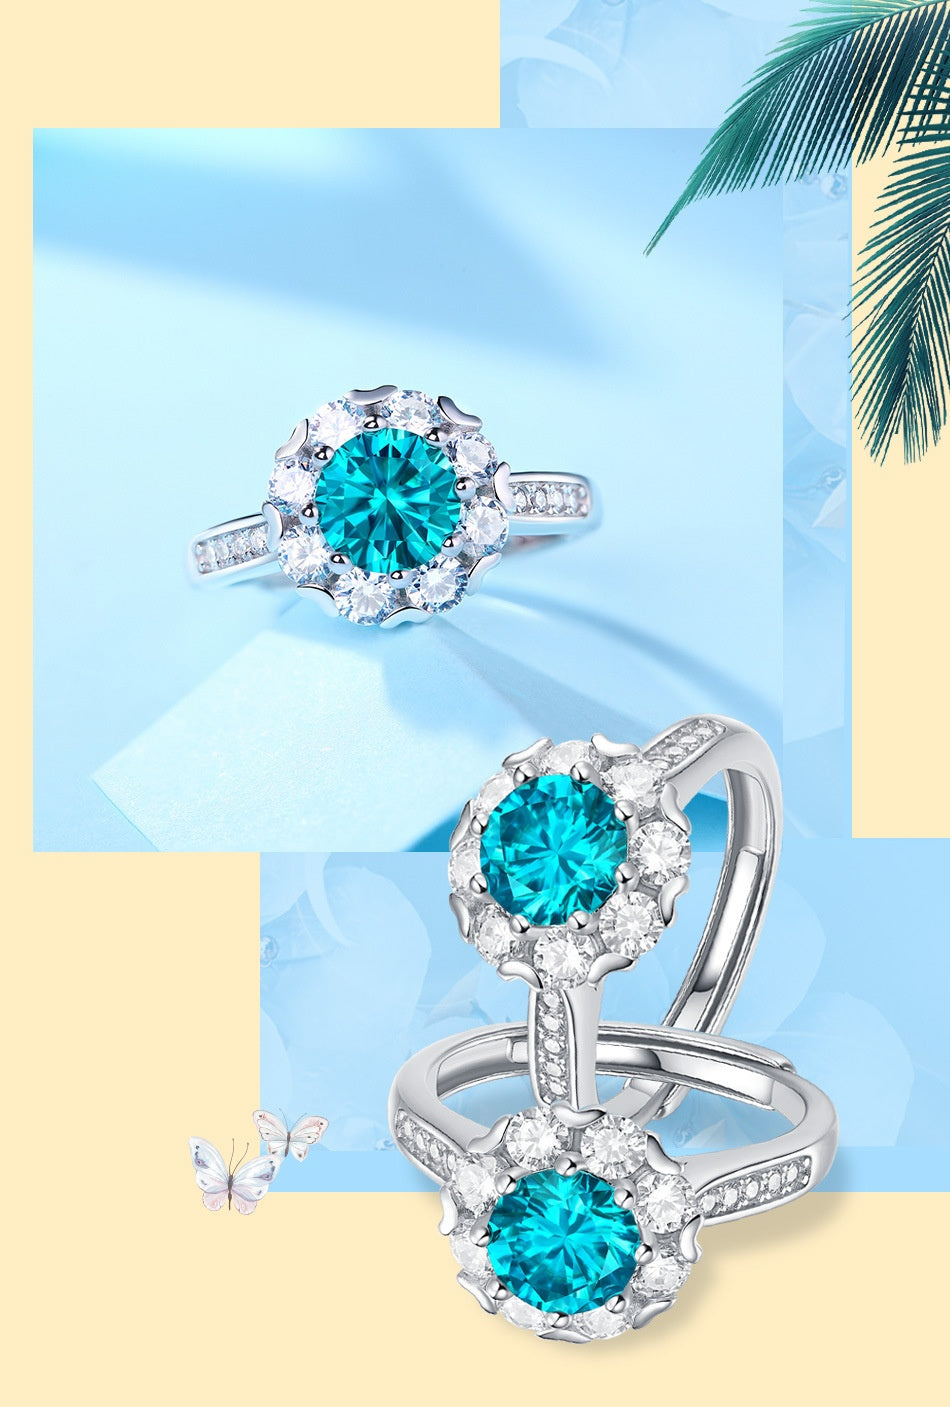 Silver Blue Ice Adventure Ring | Silver Ice Palace Ring